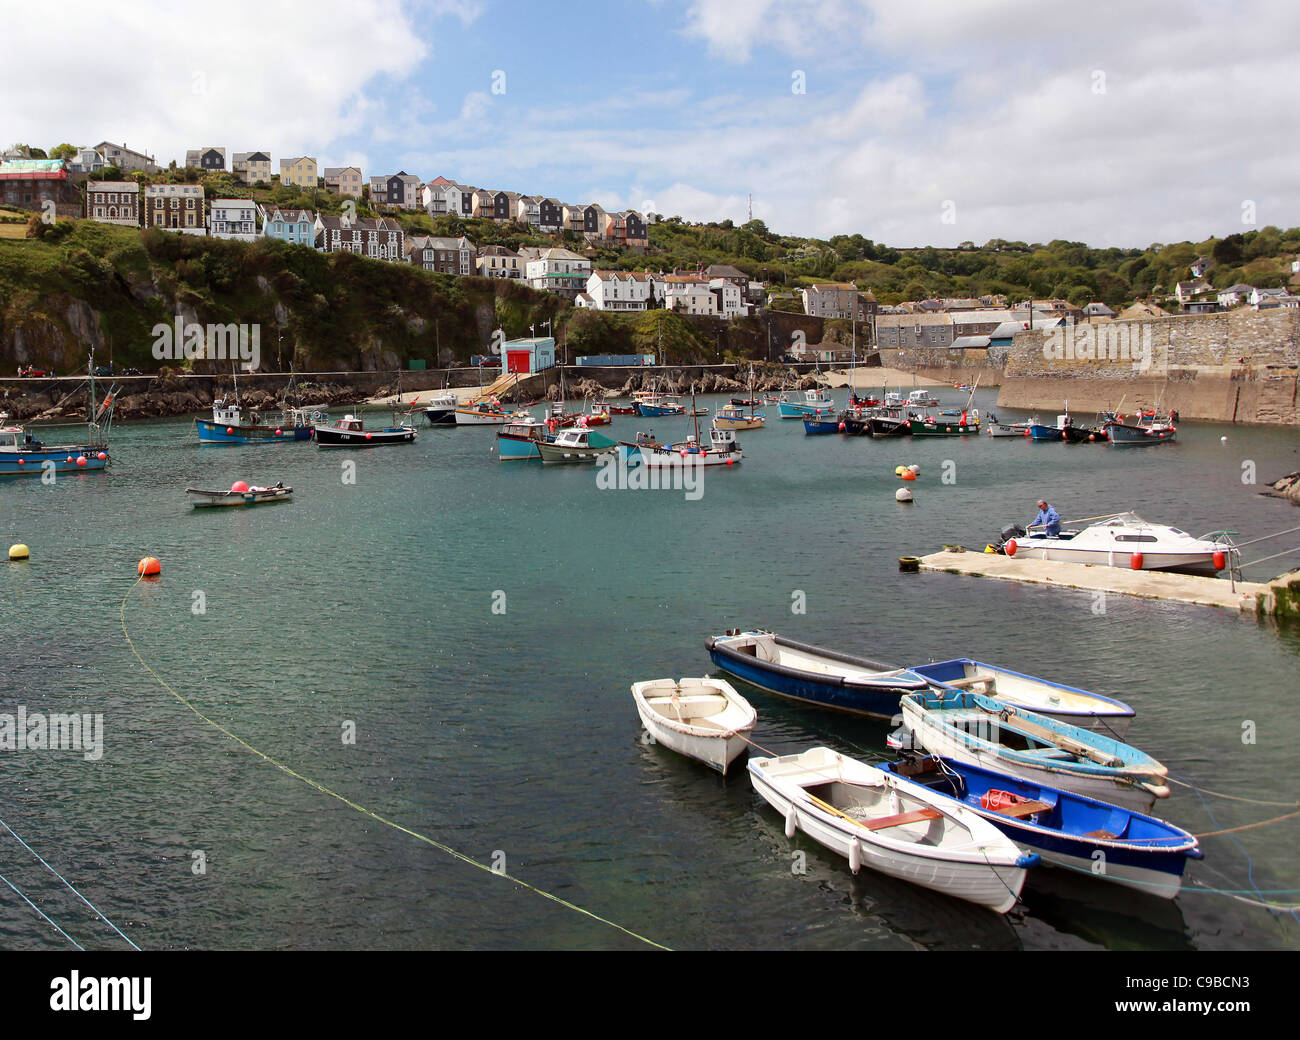 Fishing boats pictured moored in St Austell harbour in Cornwall, United Kingdom. Stock Photo